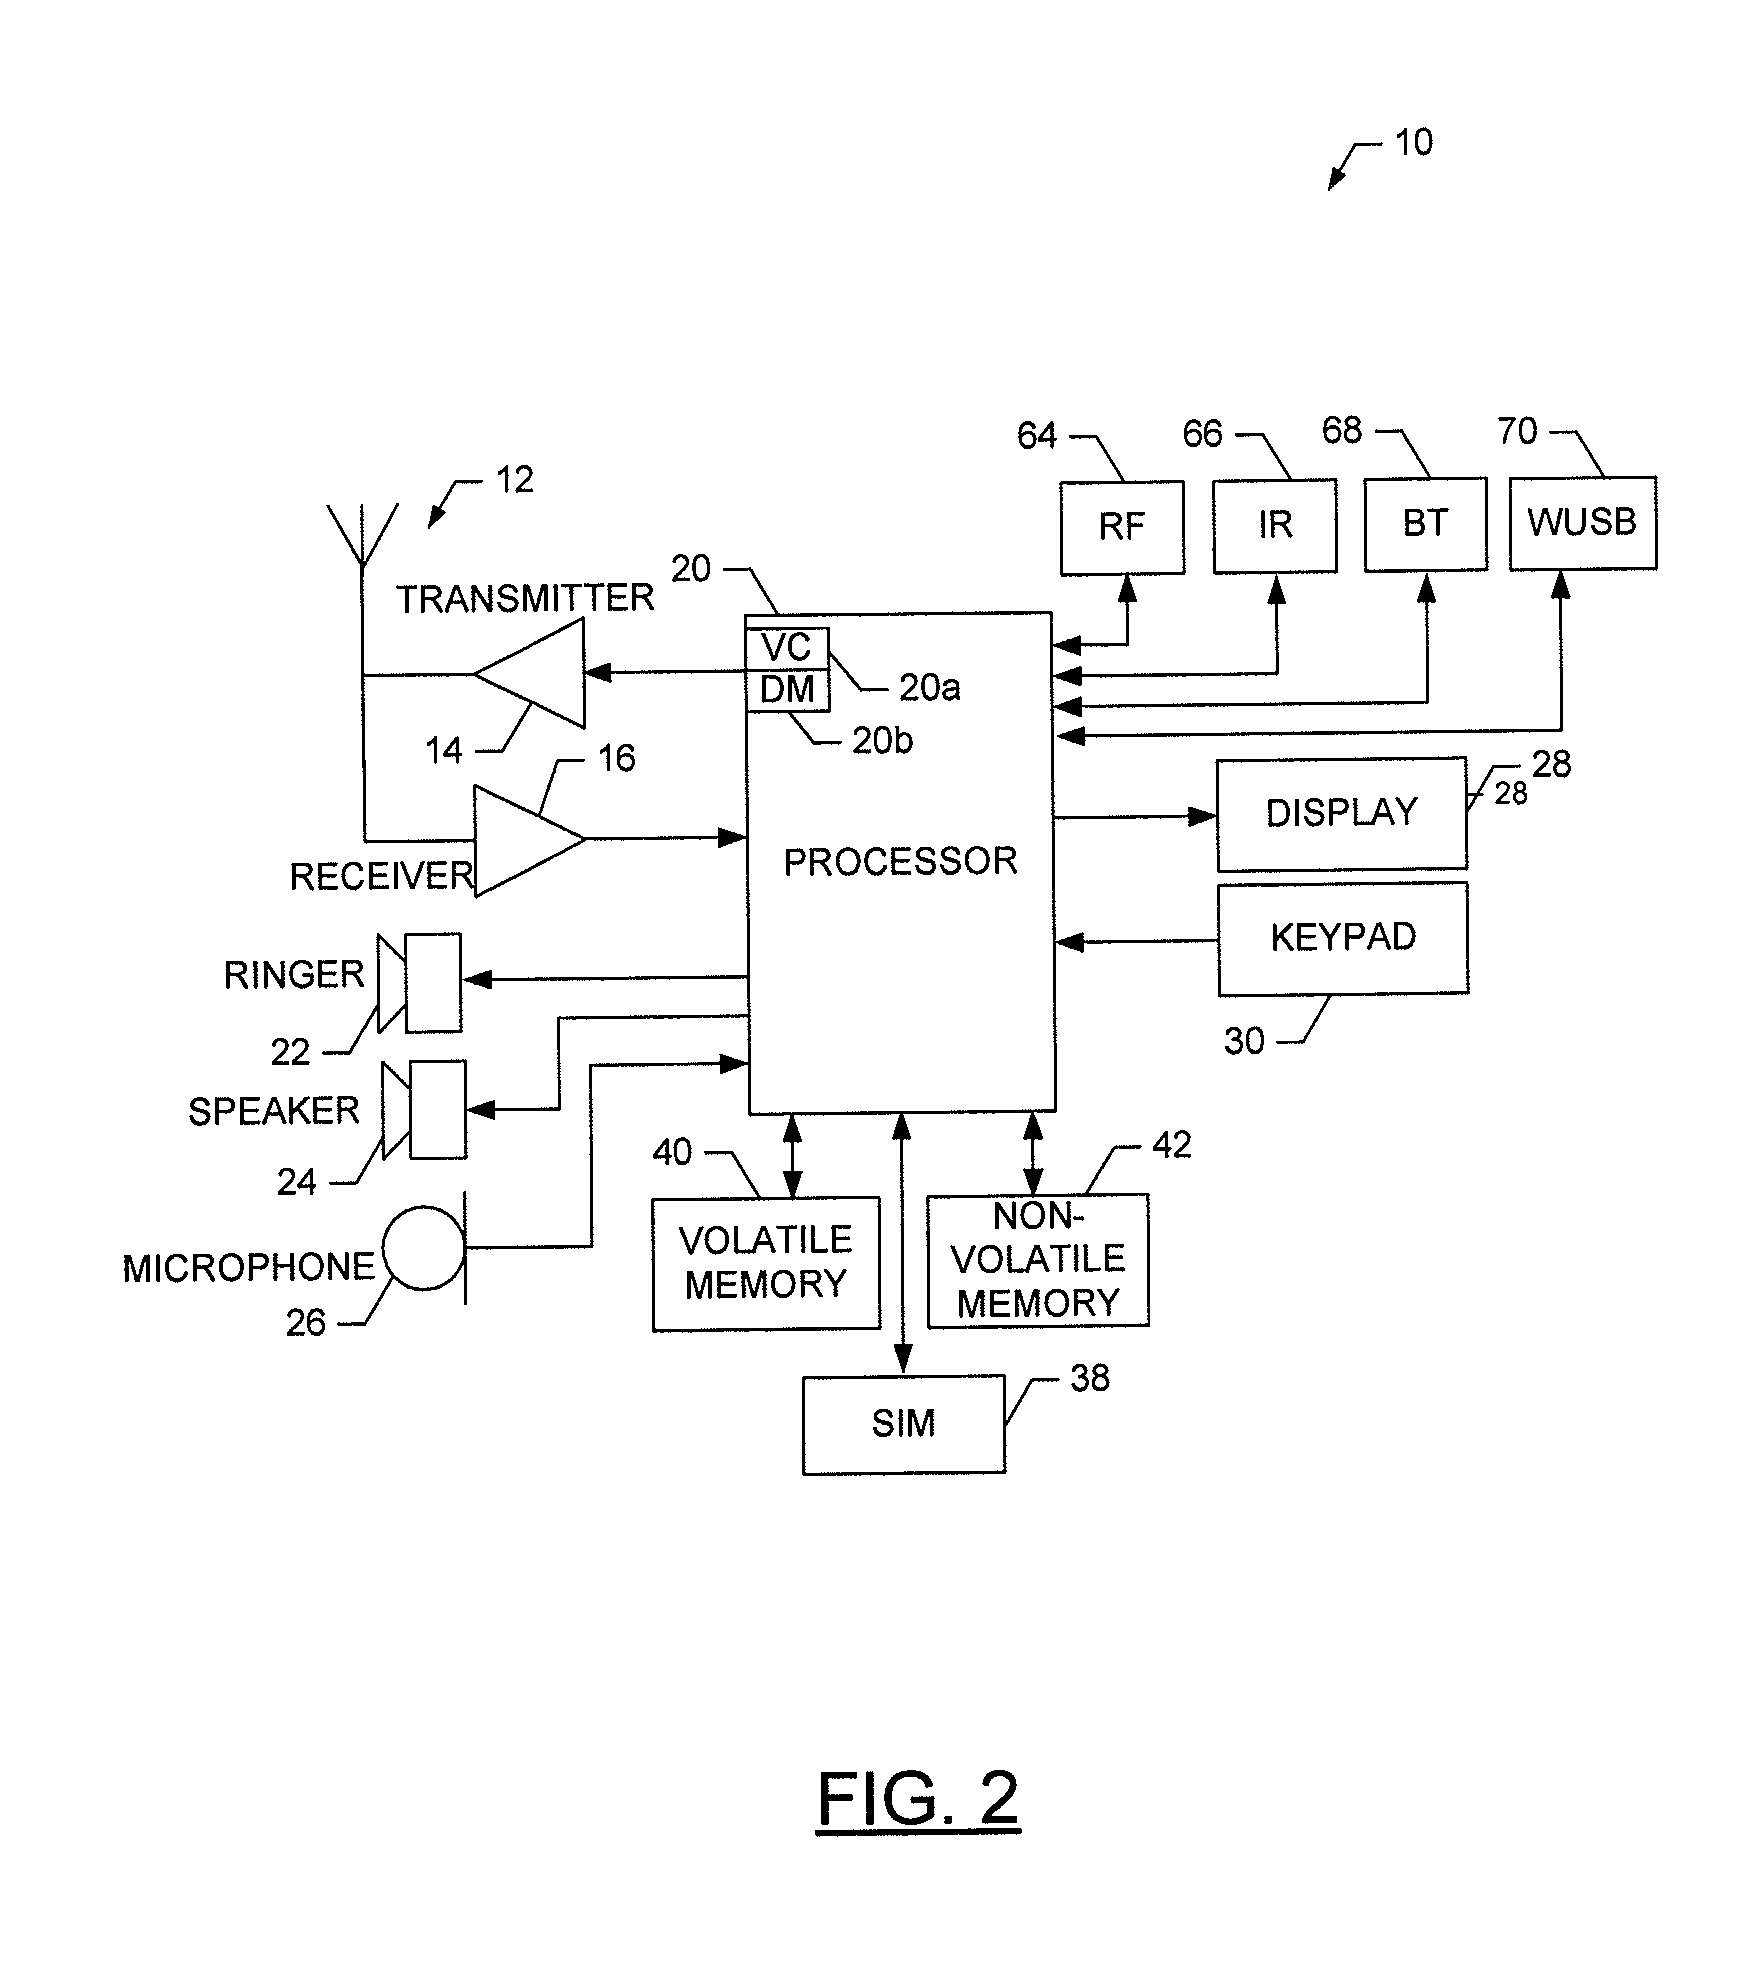 Method and apparatus for flexible caching of delivered media